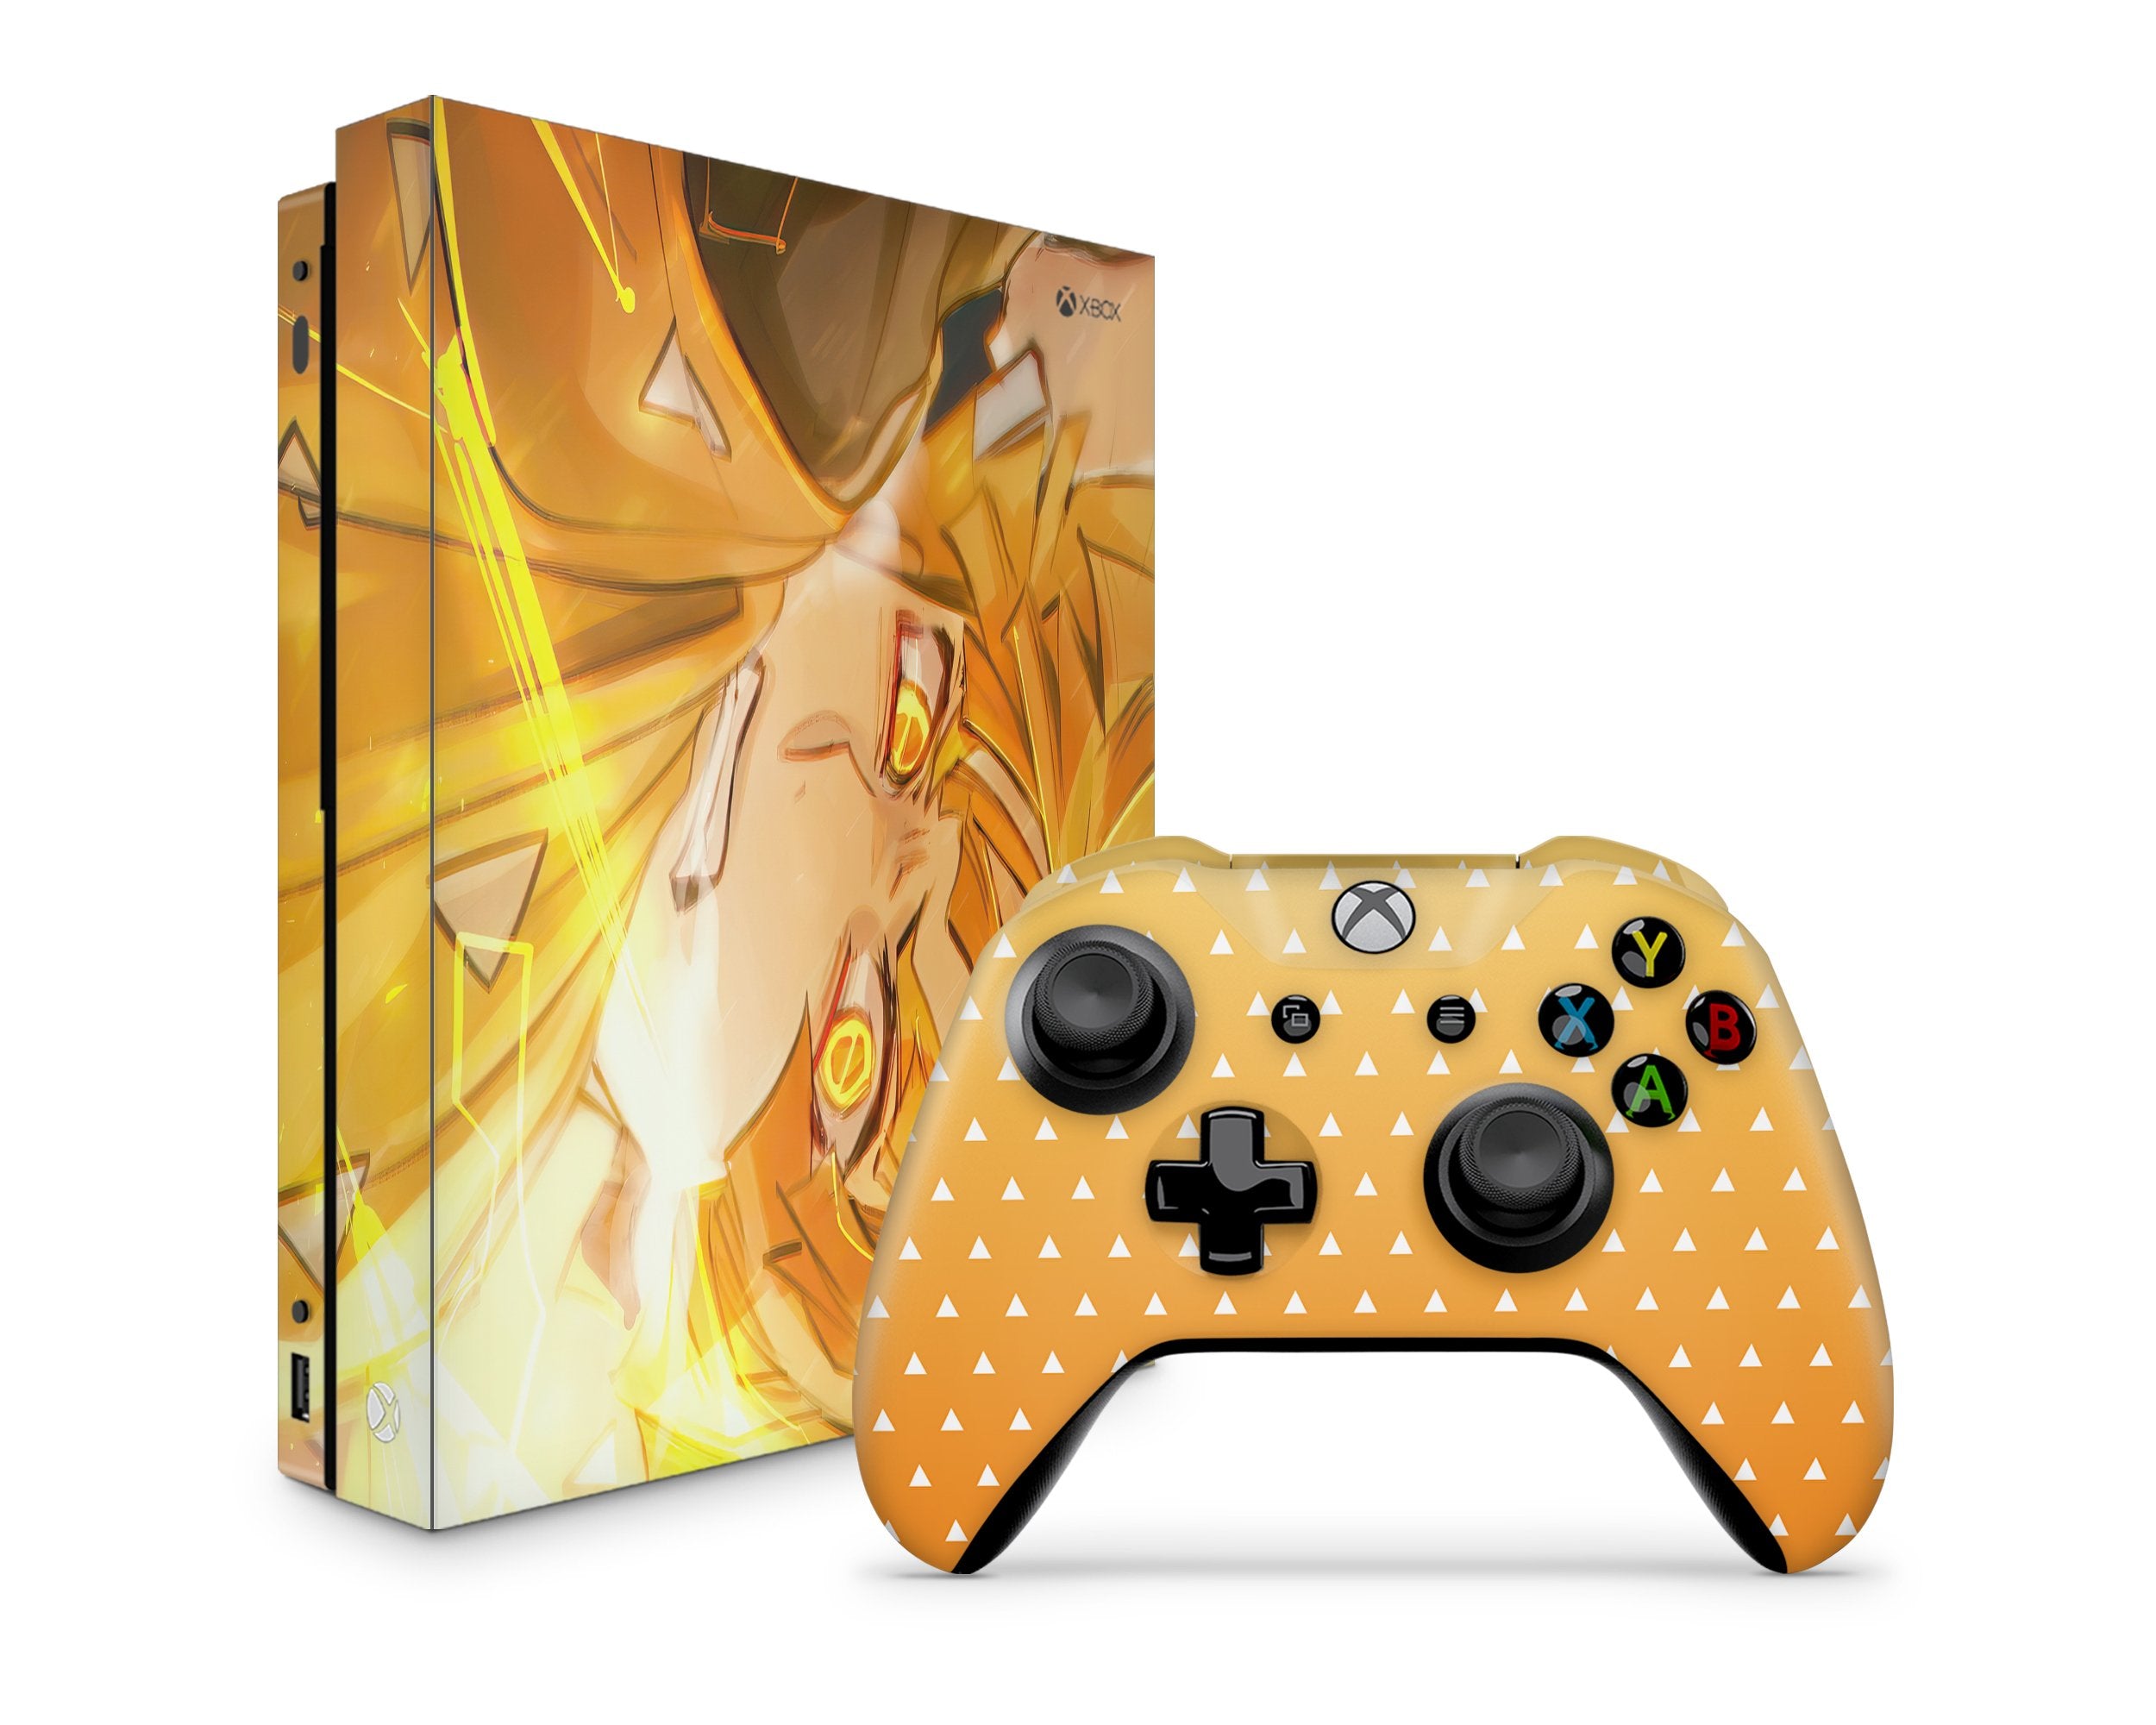 Anime Gilrs Colorful Cover For Xbox One X Sticker For Xbox One X Controller  Decal Skin - Stickers - AliExpress